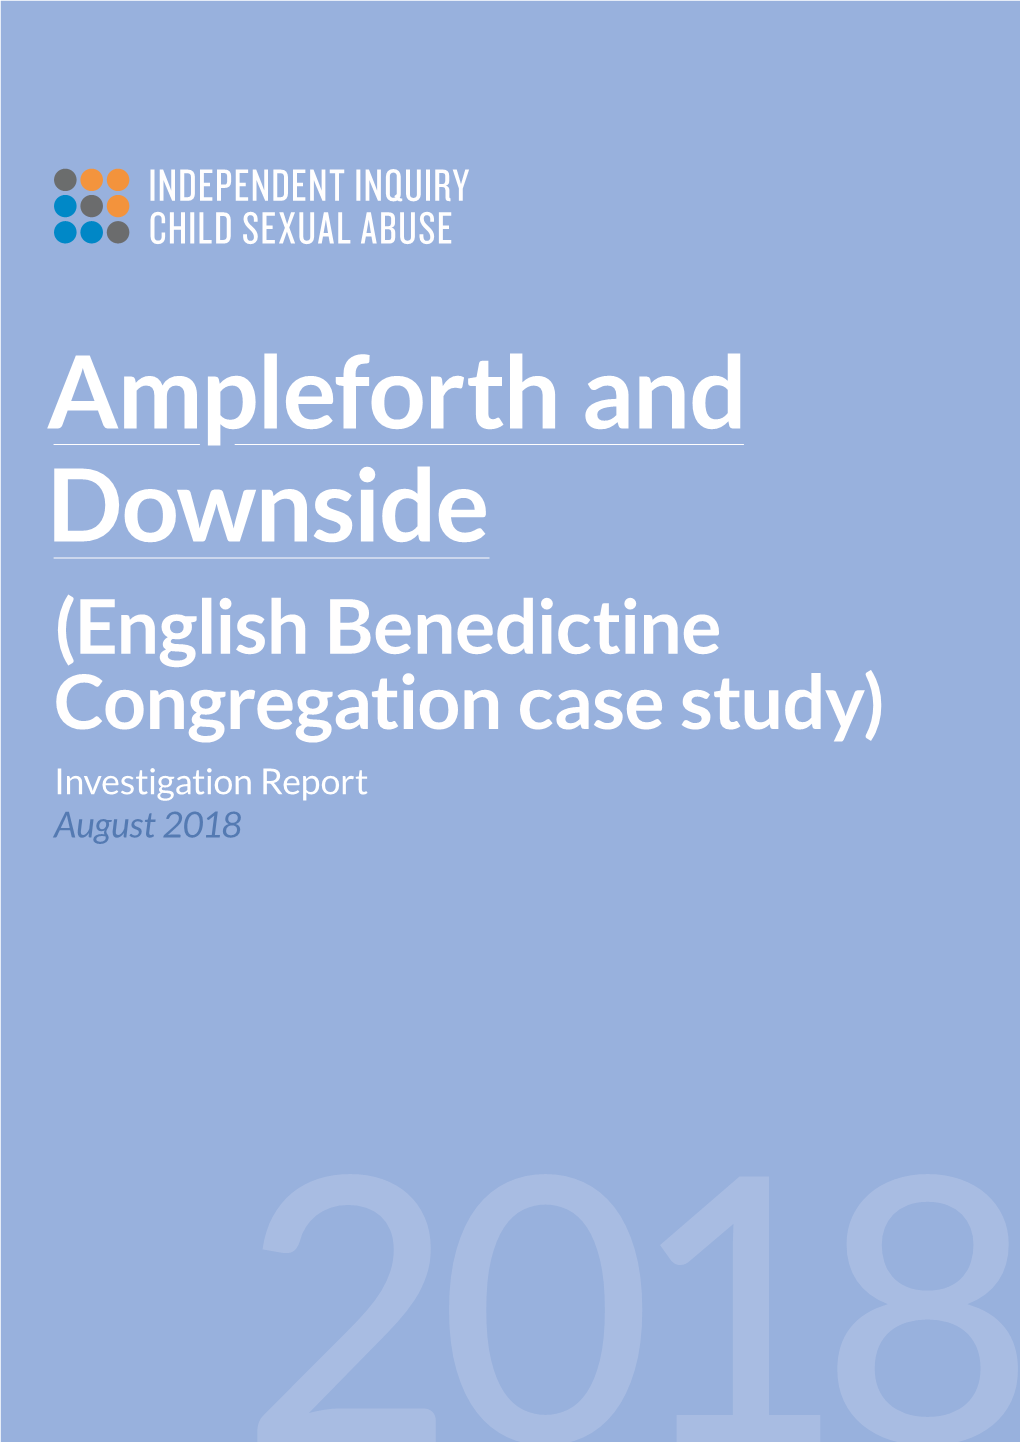 Ampleforth and Downside (English Benedictine Congregation Case Study) Investigation Report August 2018 Investigation Report